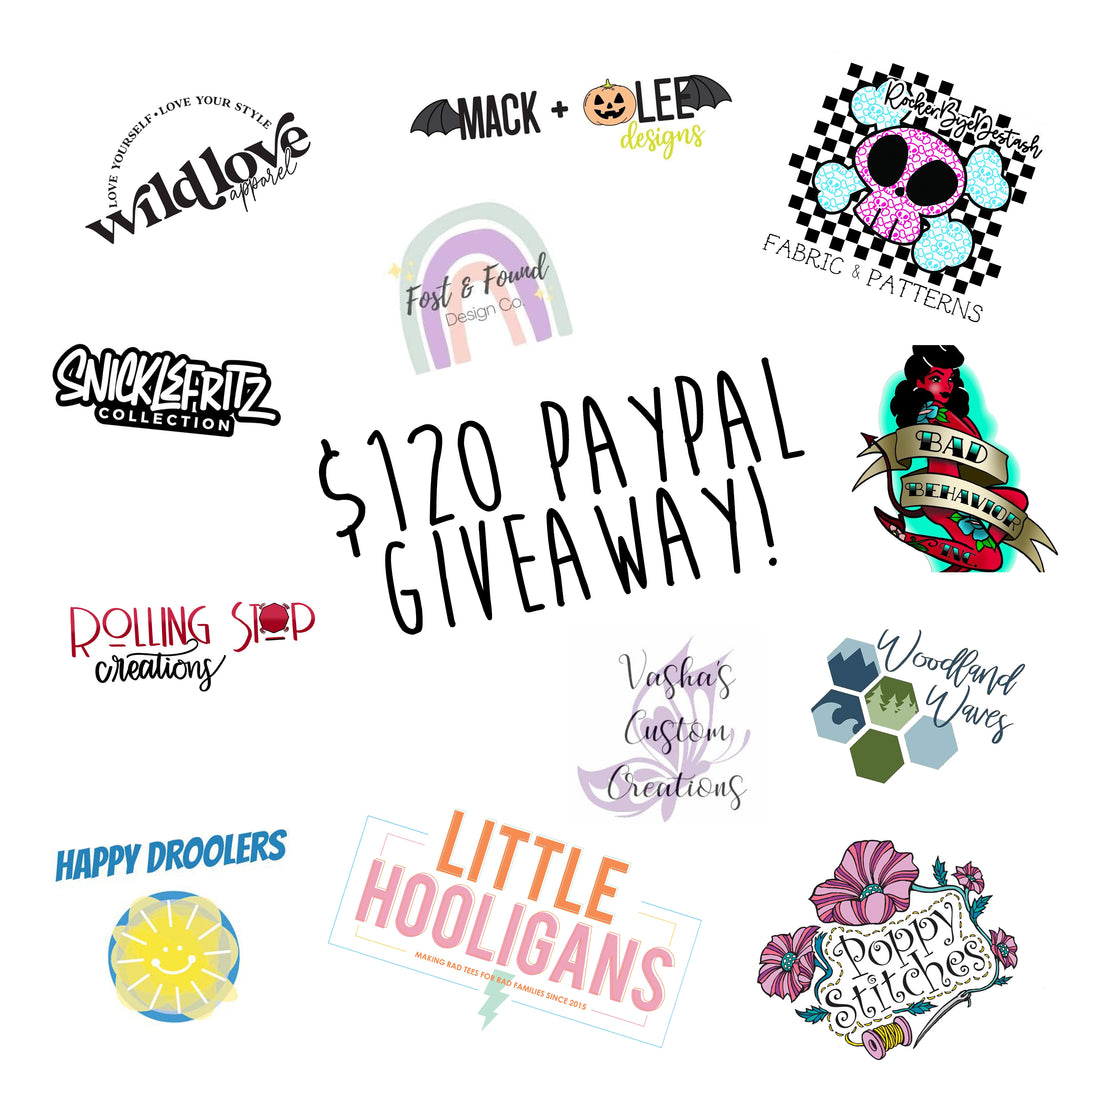 Incredible Small Shop Giveaway! Enter Here!